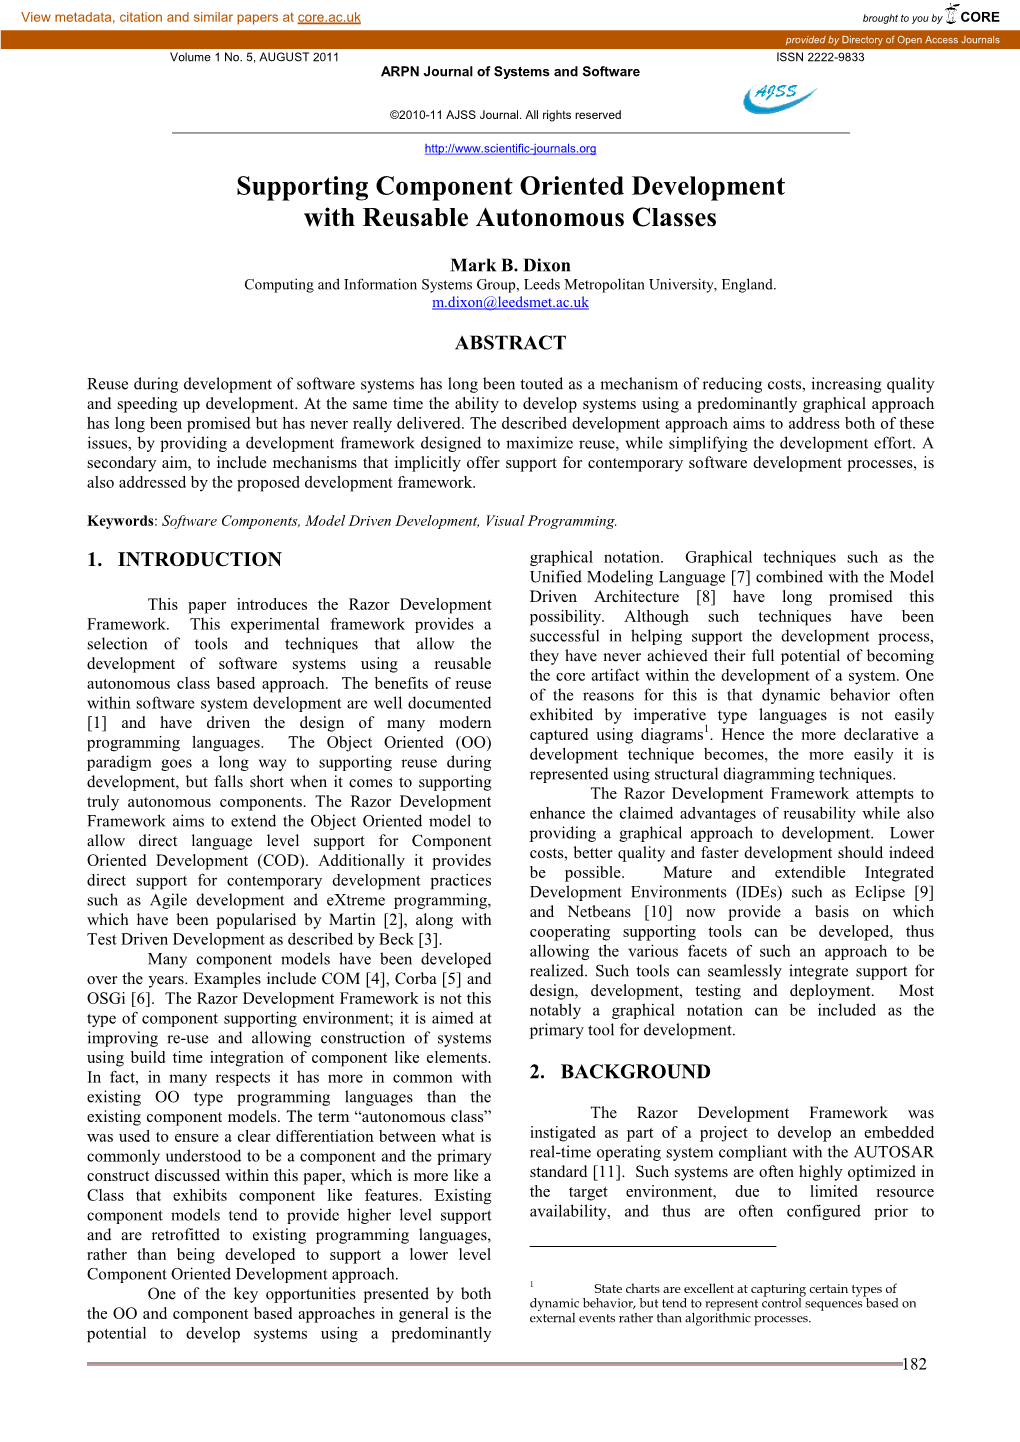 Journal of System and Software Supporting Component